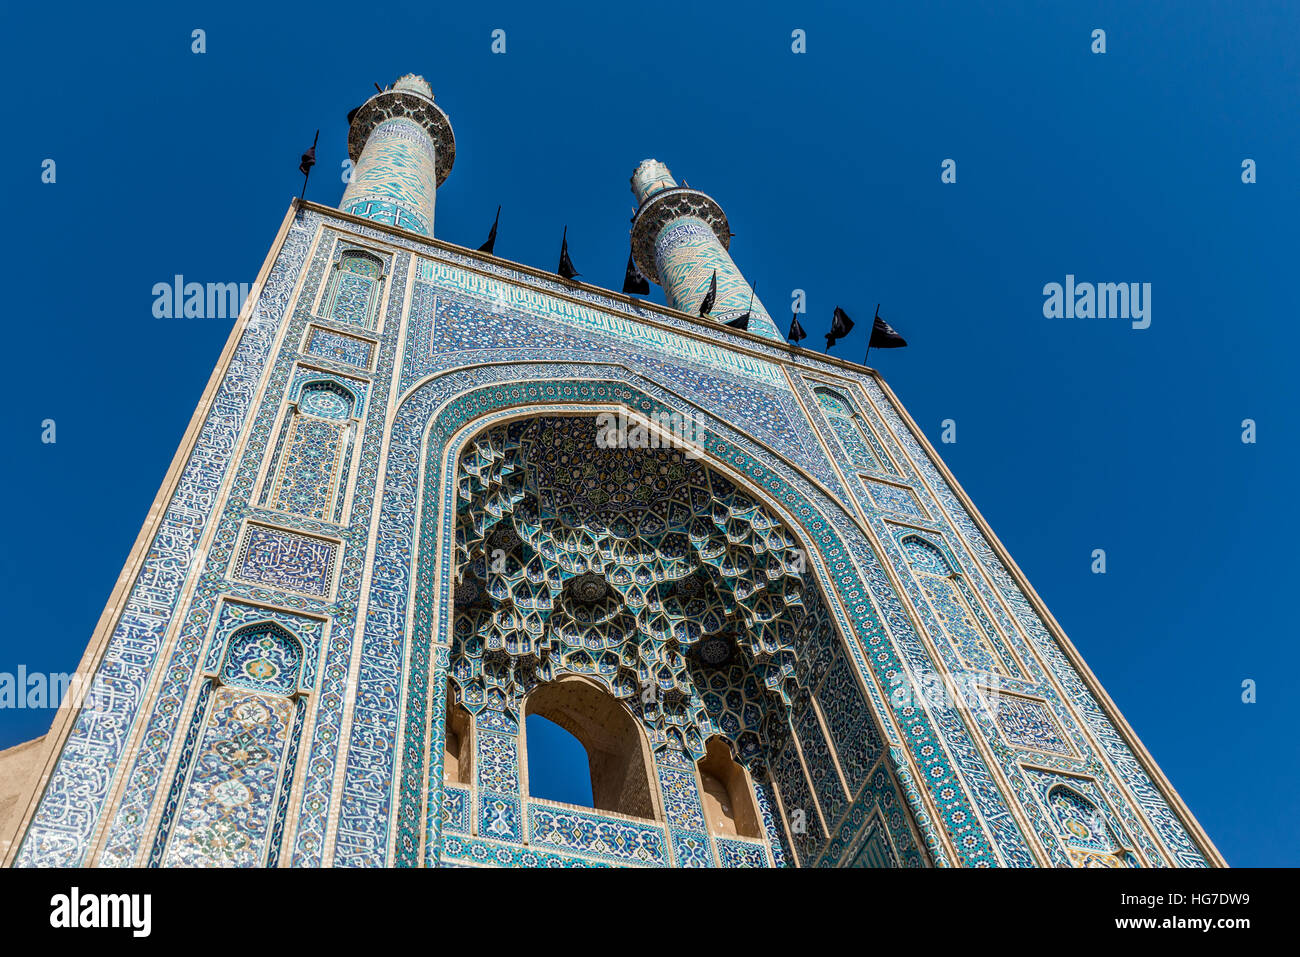 800-year old grand, congregational Jameh Mosque of Yazd city in Iran Stock Photo